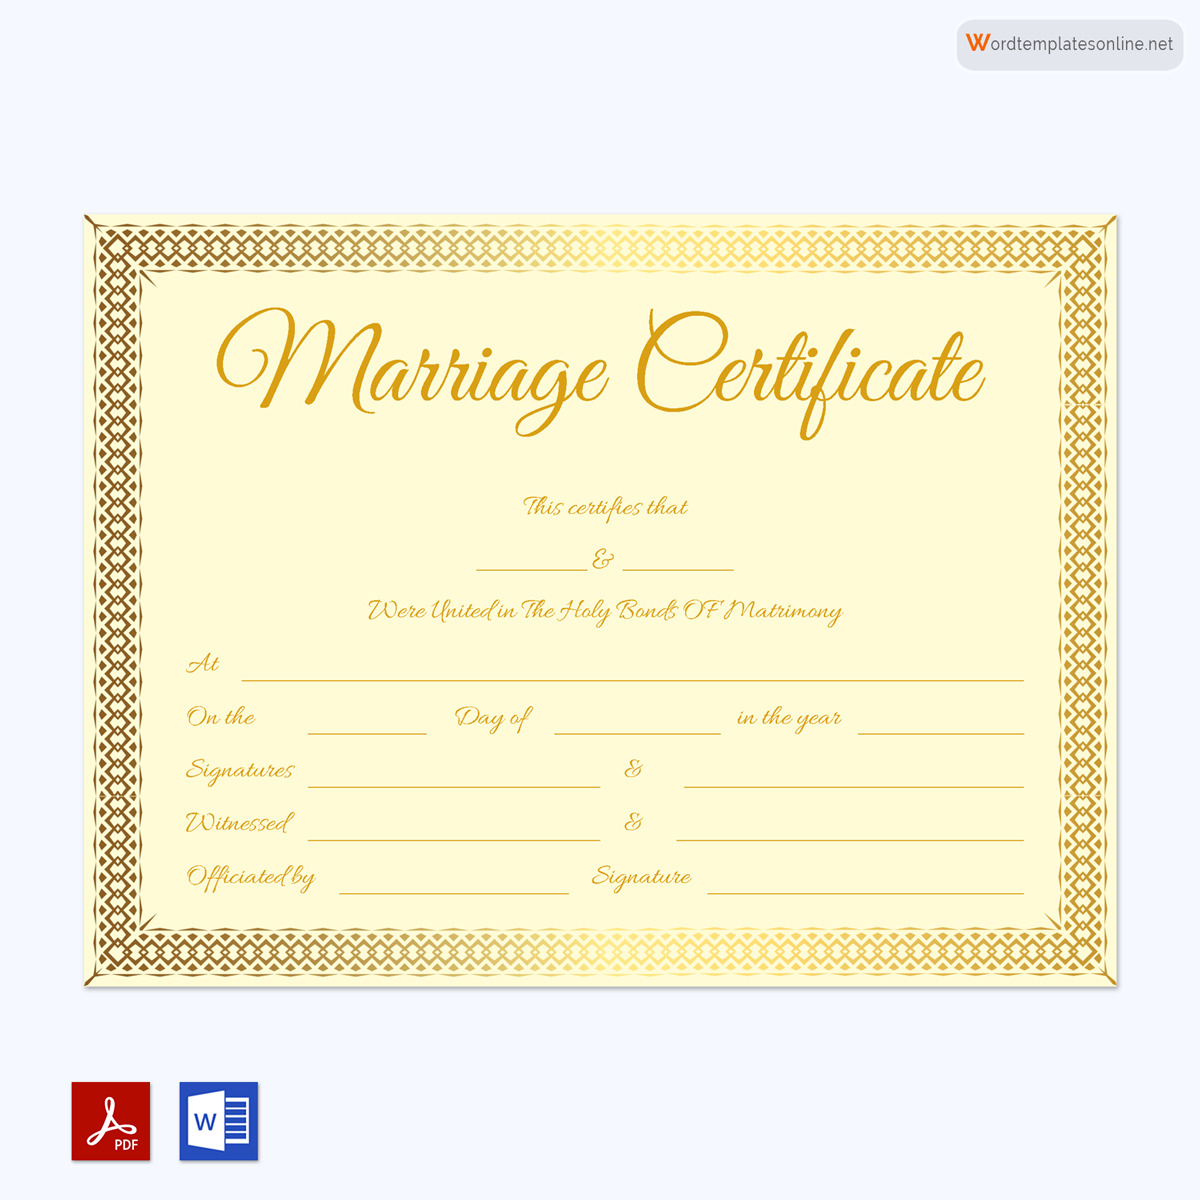  free marriage certificate templates21